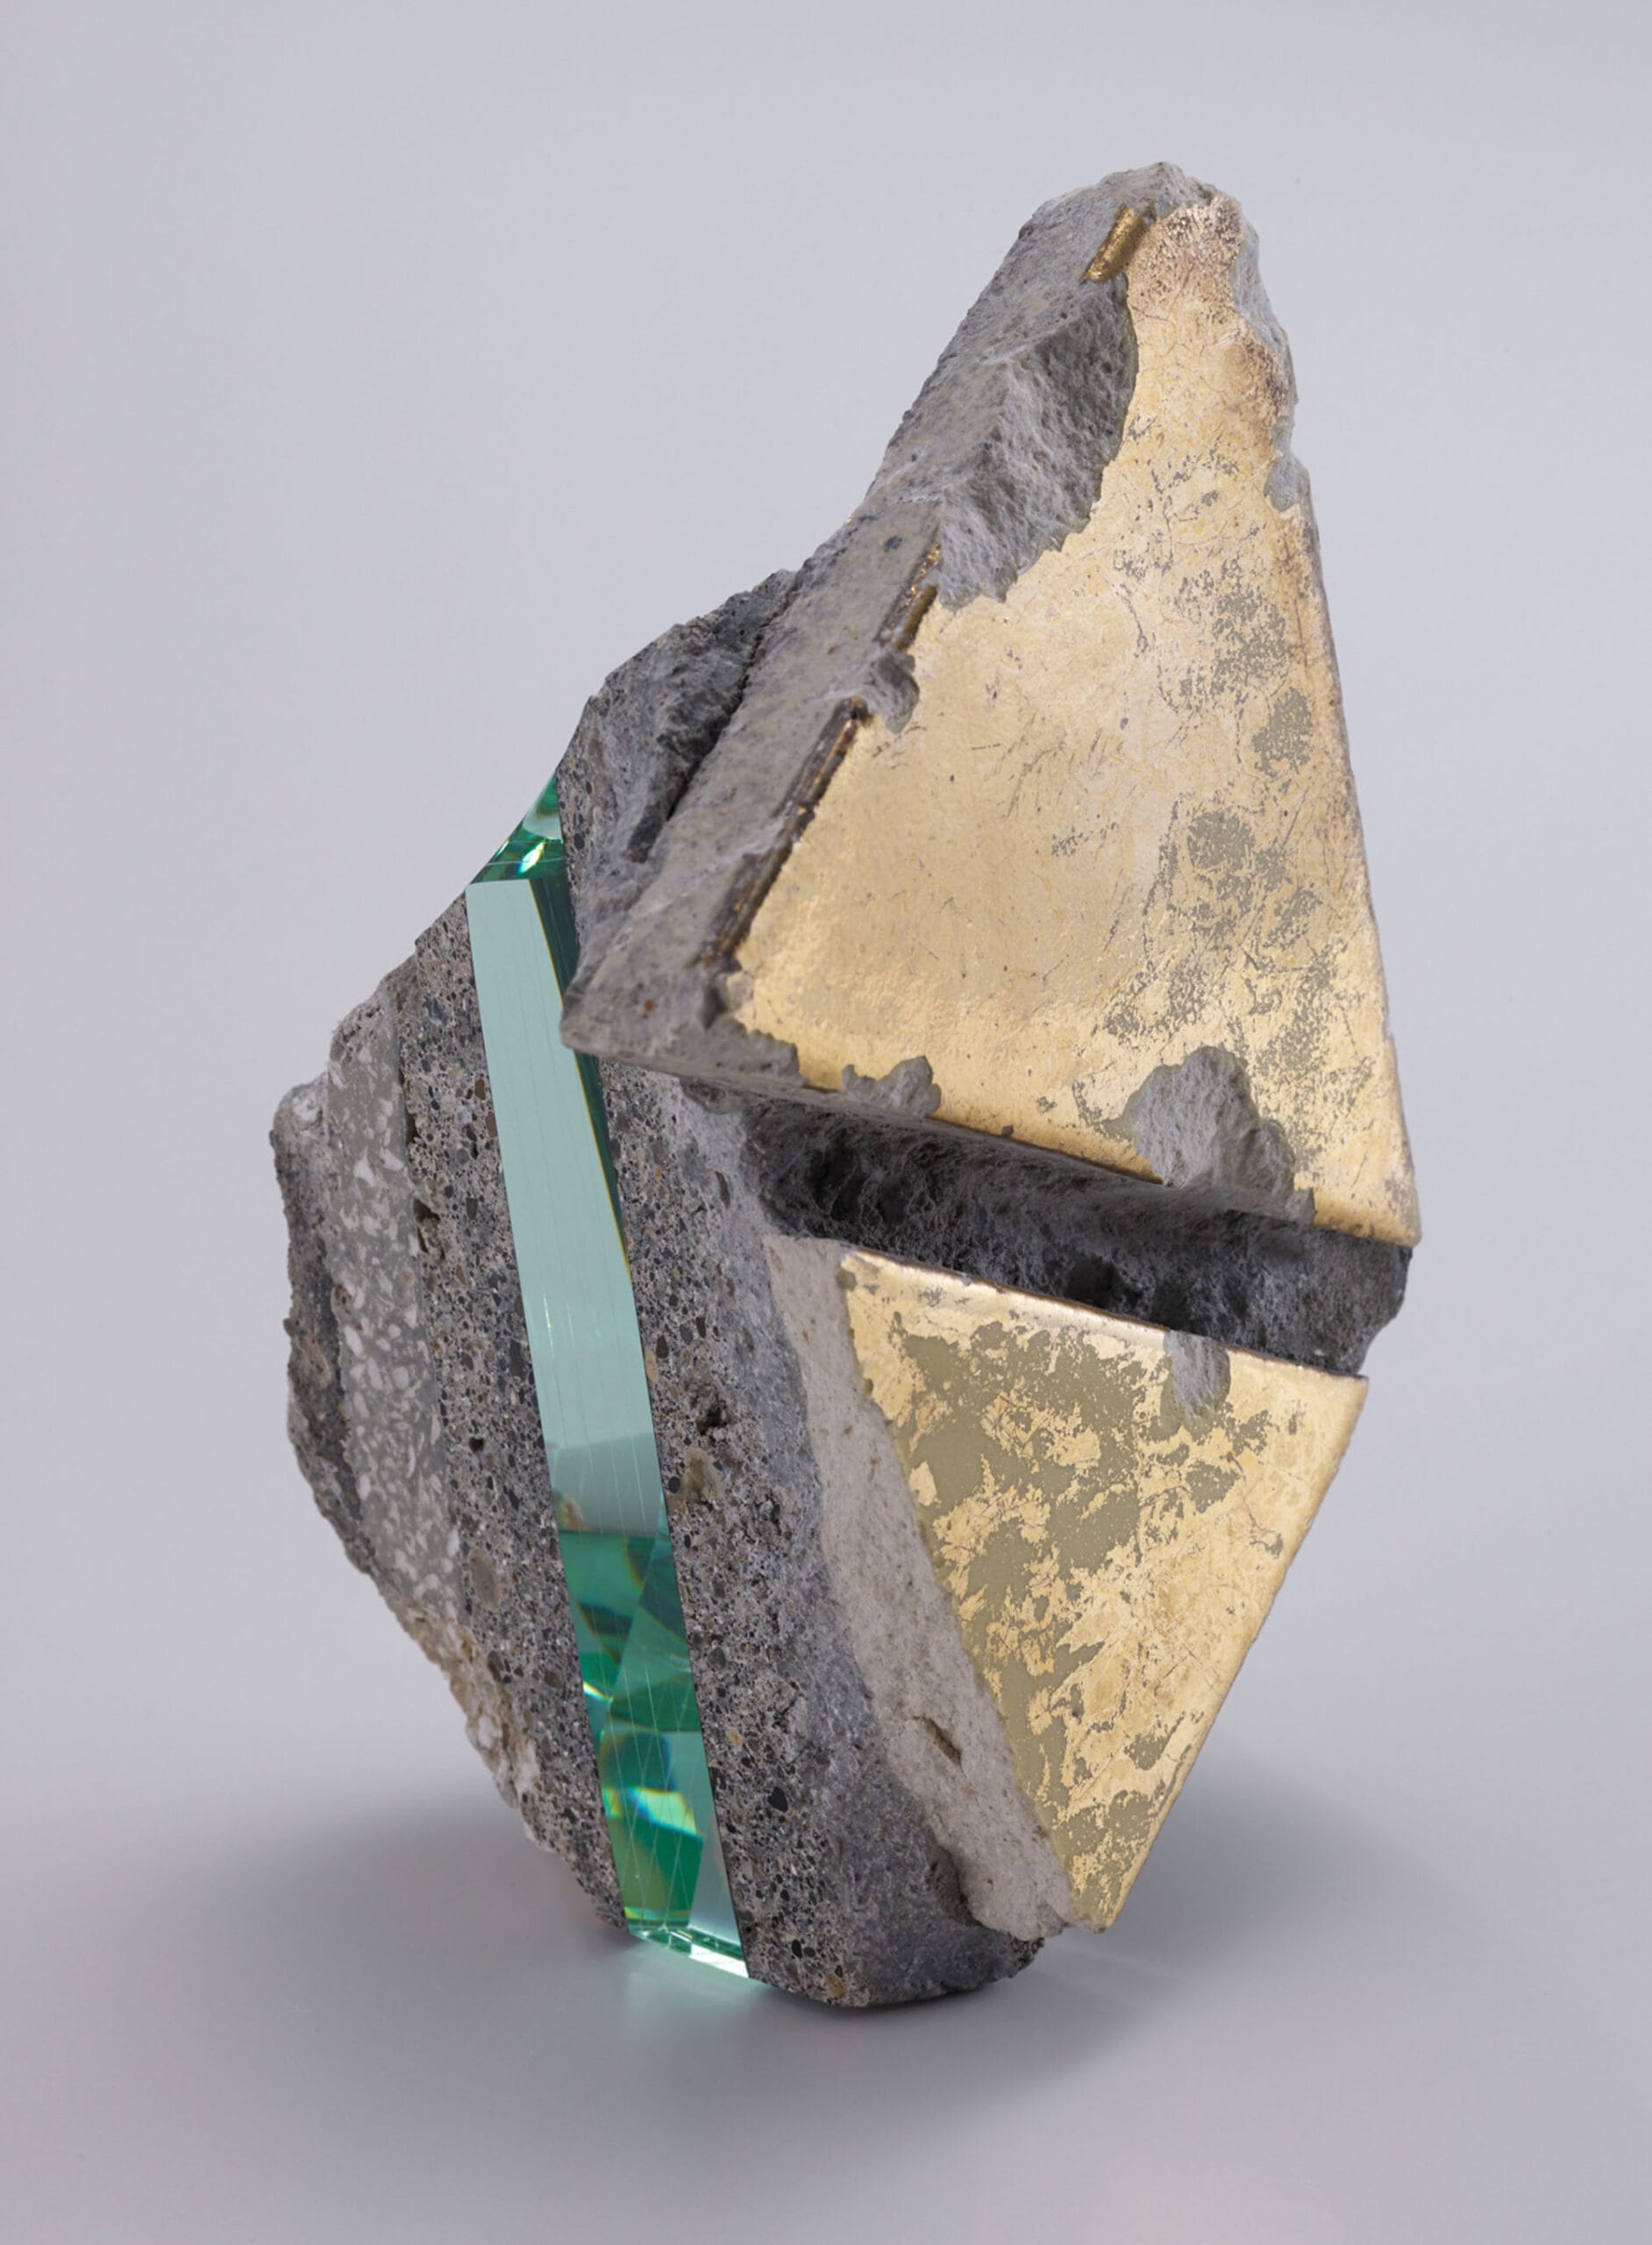 a chunk of debris from a hotel, including an embedded section of layered of aquamarine glass